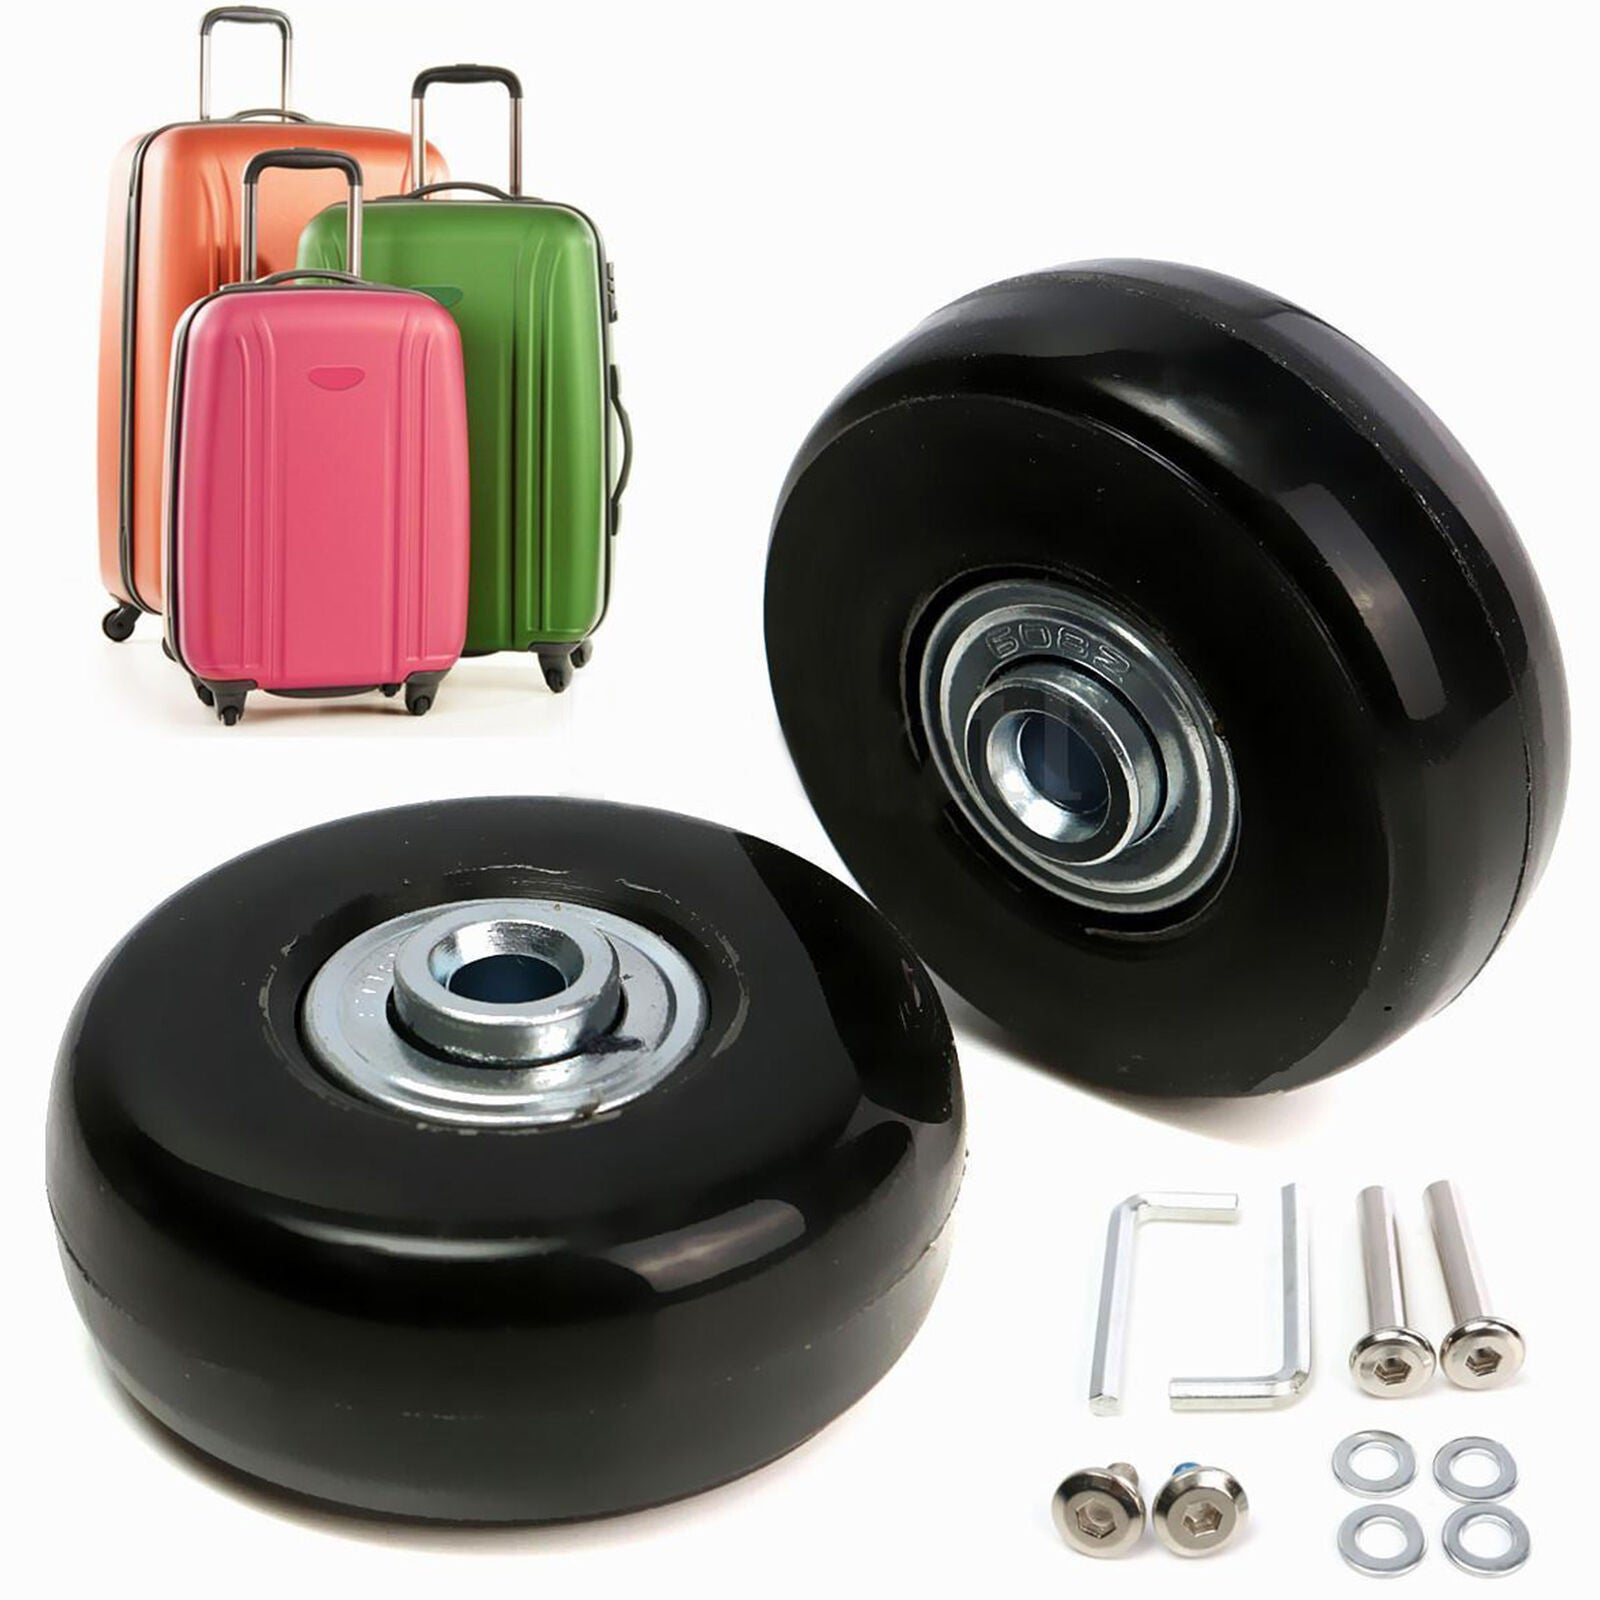 2pcs 50mm Luggage Suitcase Replacement Wheels Axles Rubber Deluxe Repair